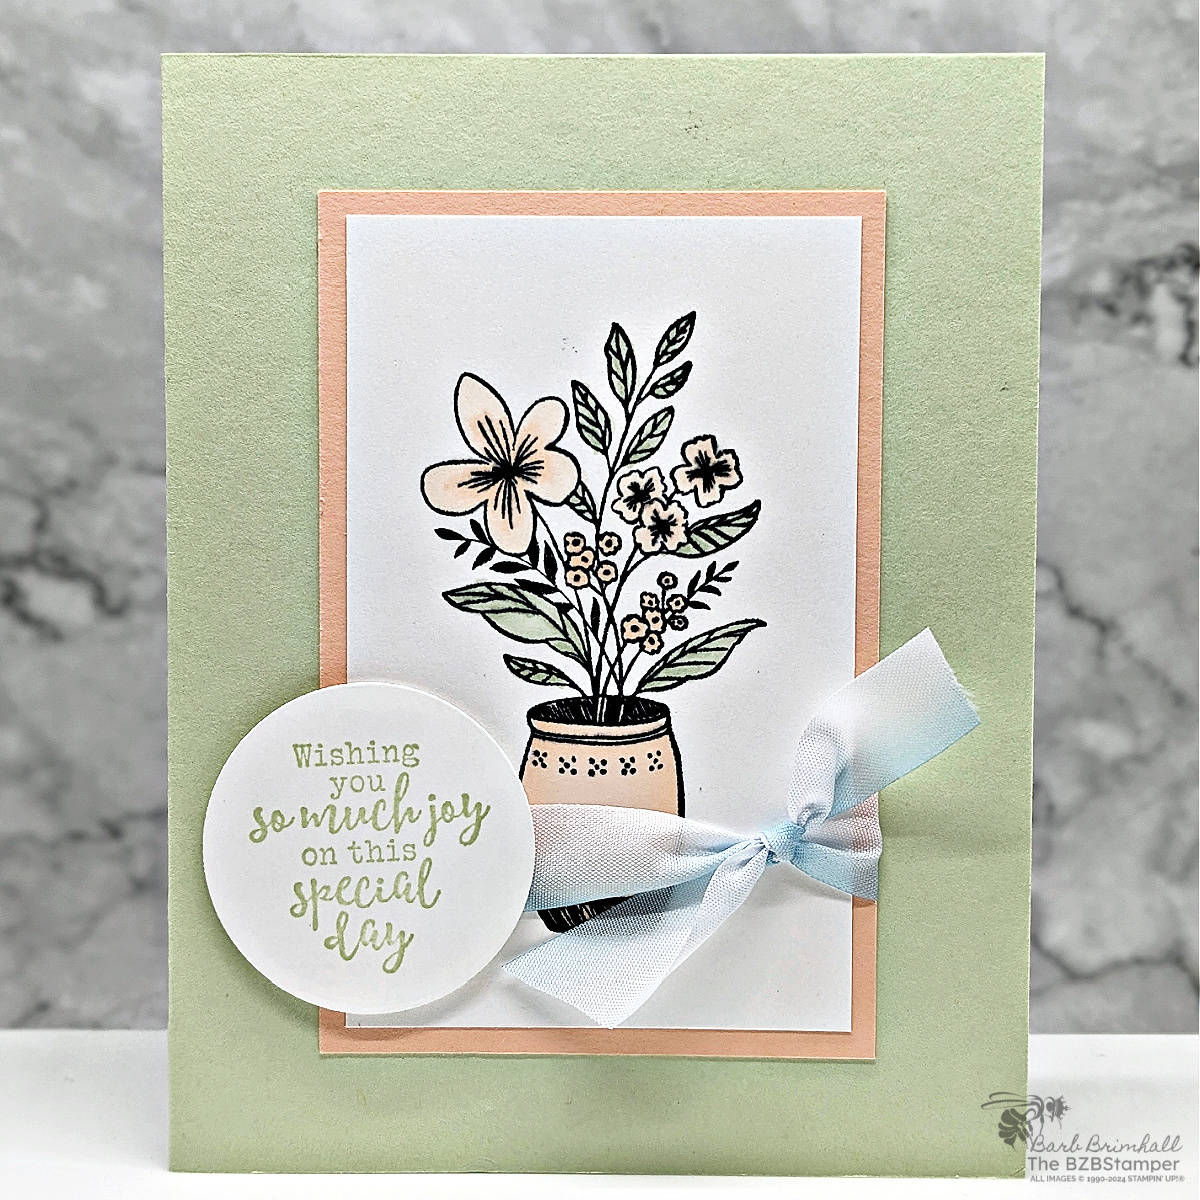 Handmade Card using the Everyday Details Stamp Set in greens and pinks.  Features a vase, a sentiment on a circle tag and pretty blue ribbon.